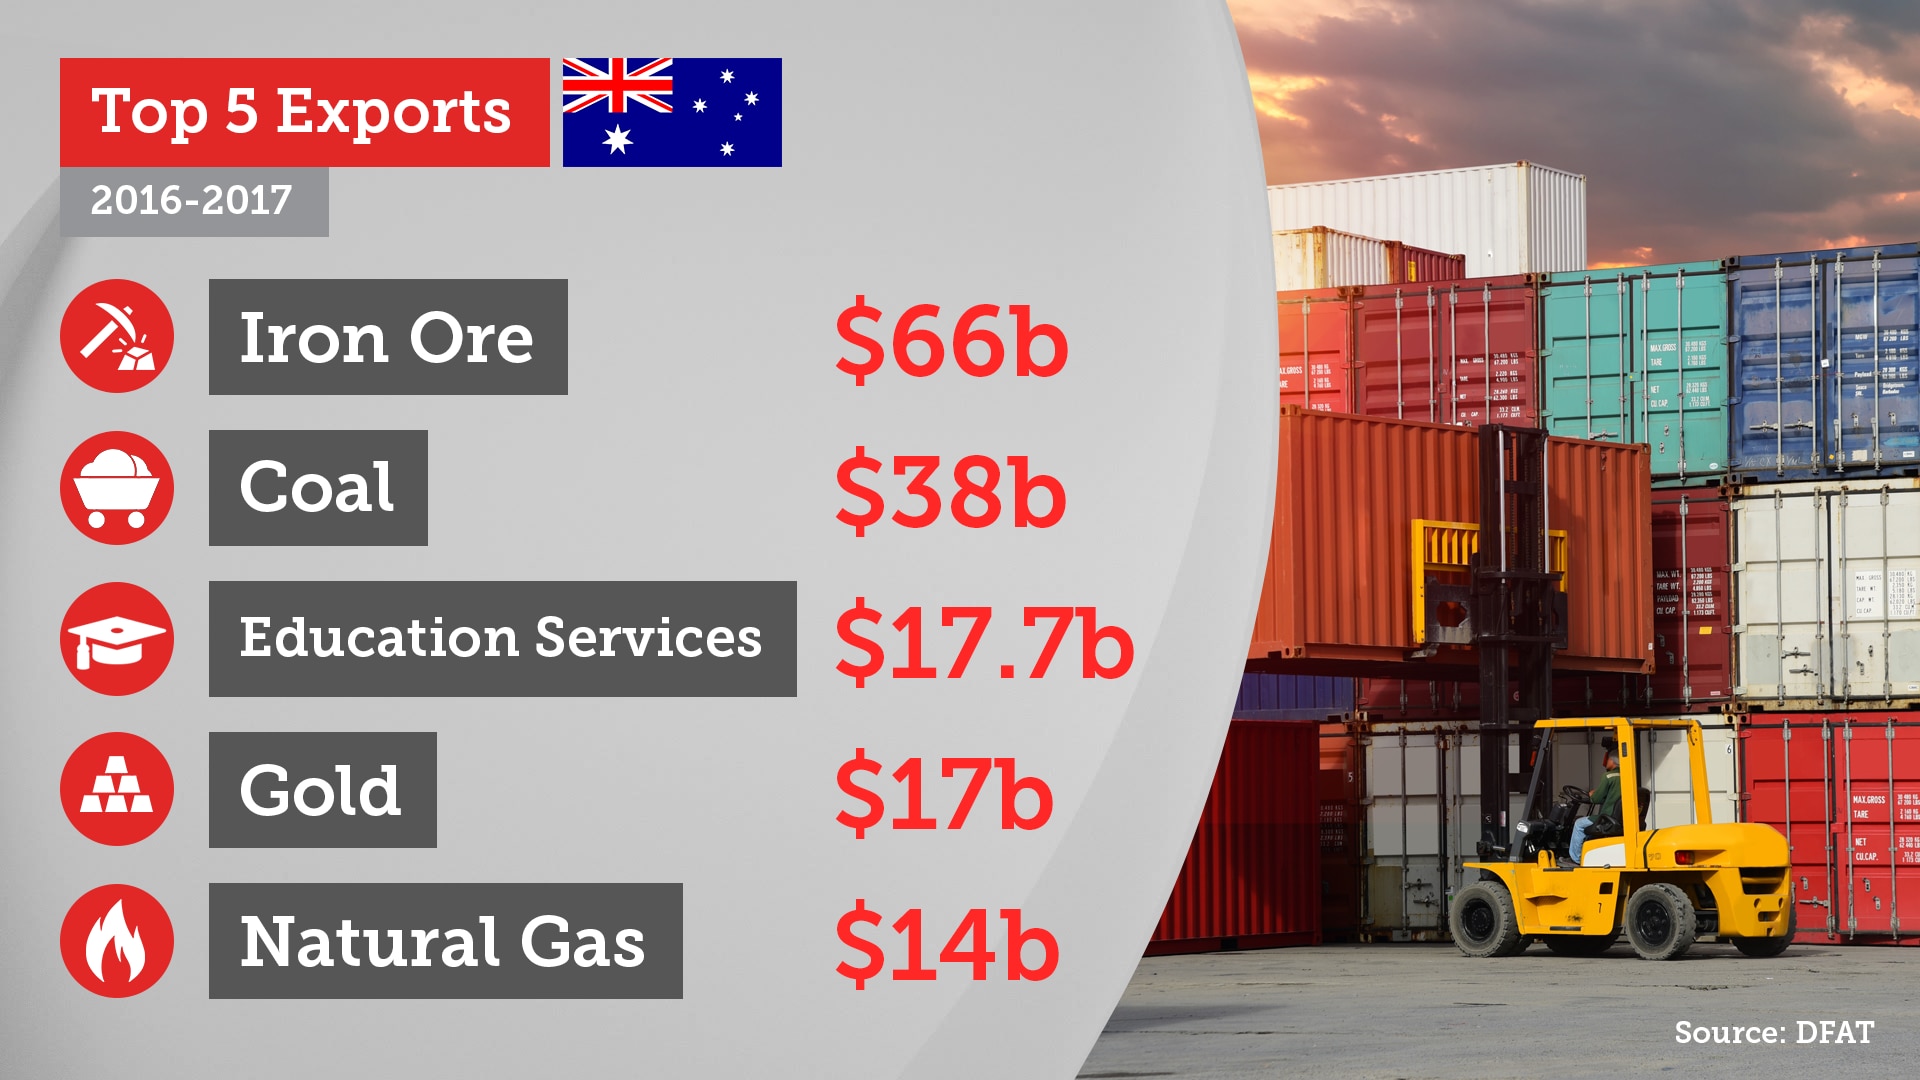 Australia's trade explained: Top imports, exports and trading partners